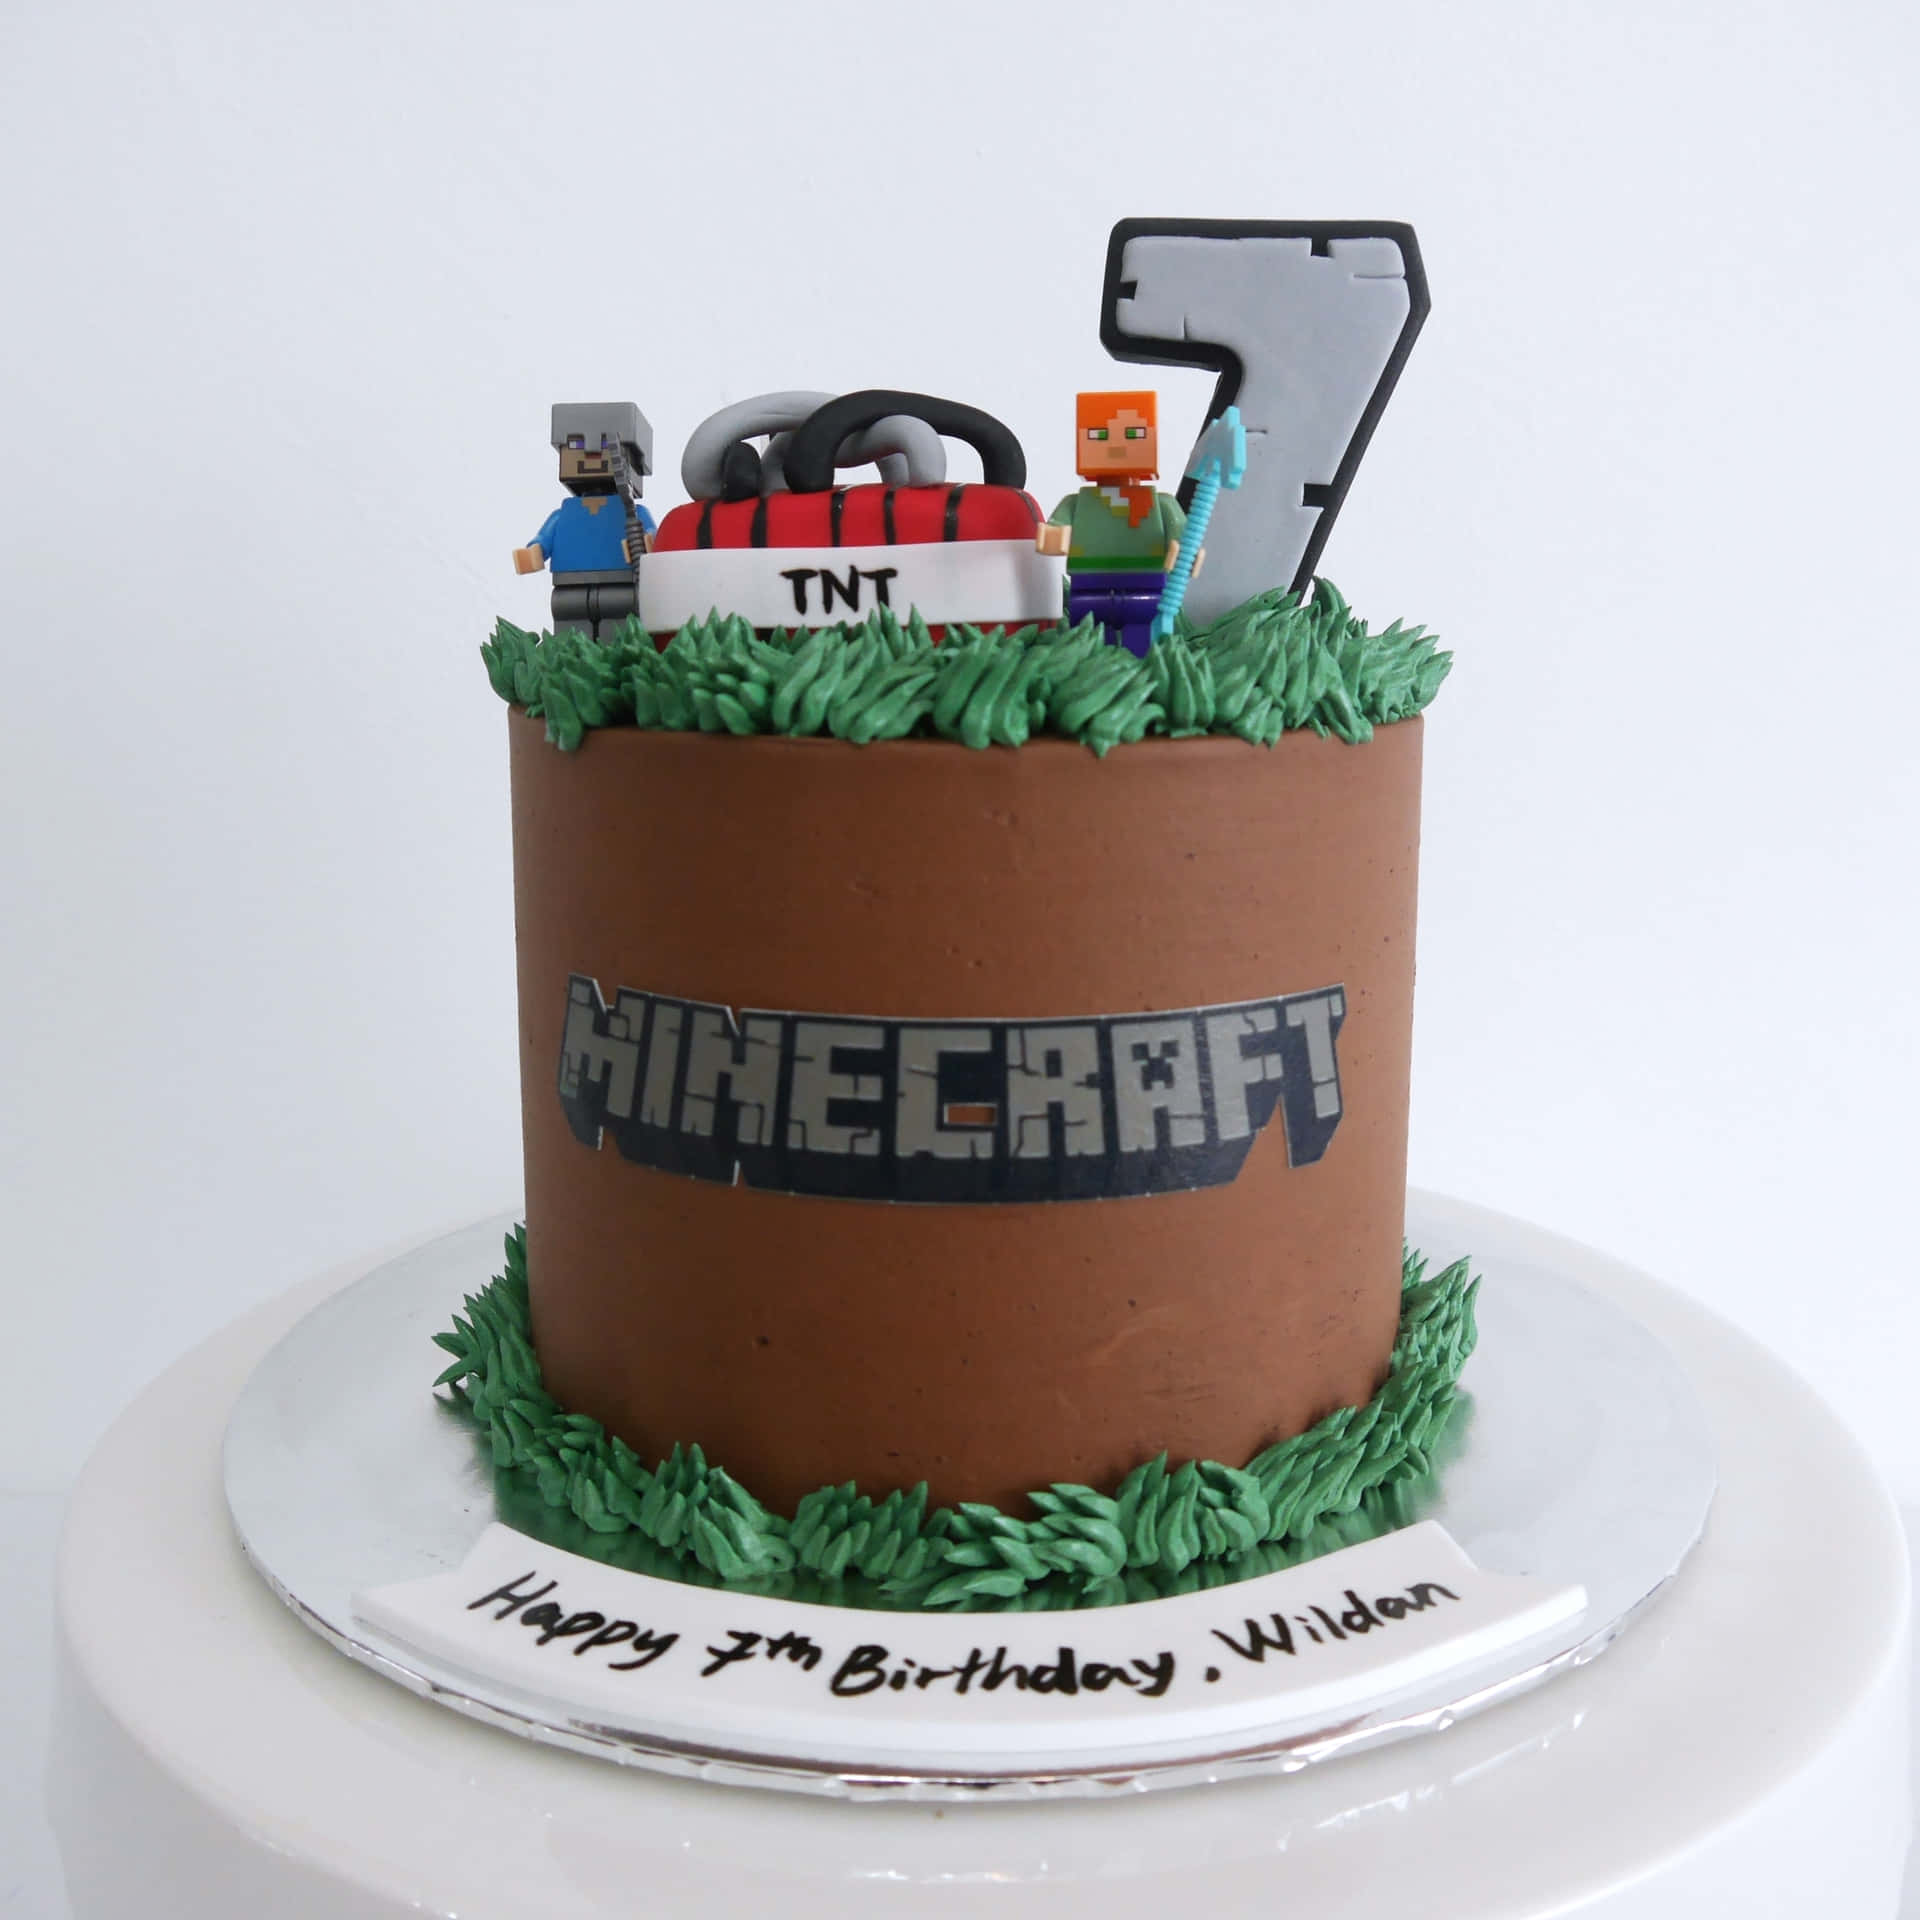 How To Throw a Simple Minecraft Birthday Party - The Kitchen Magpie